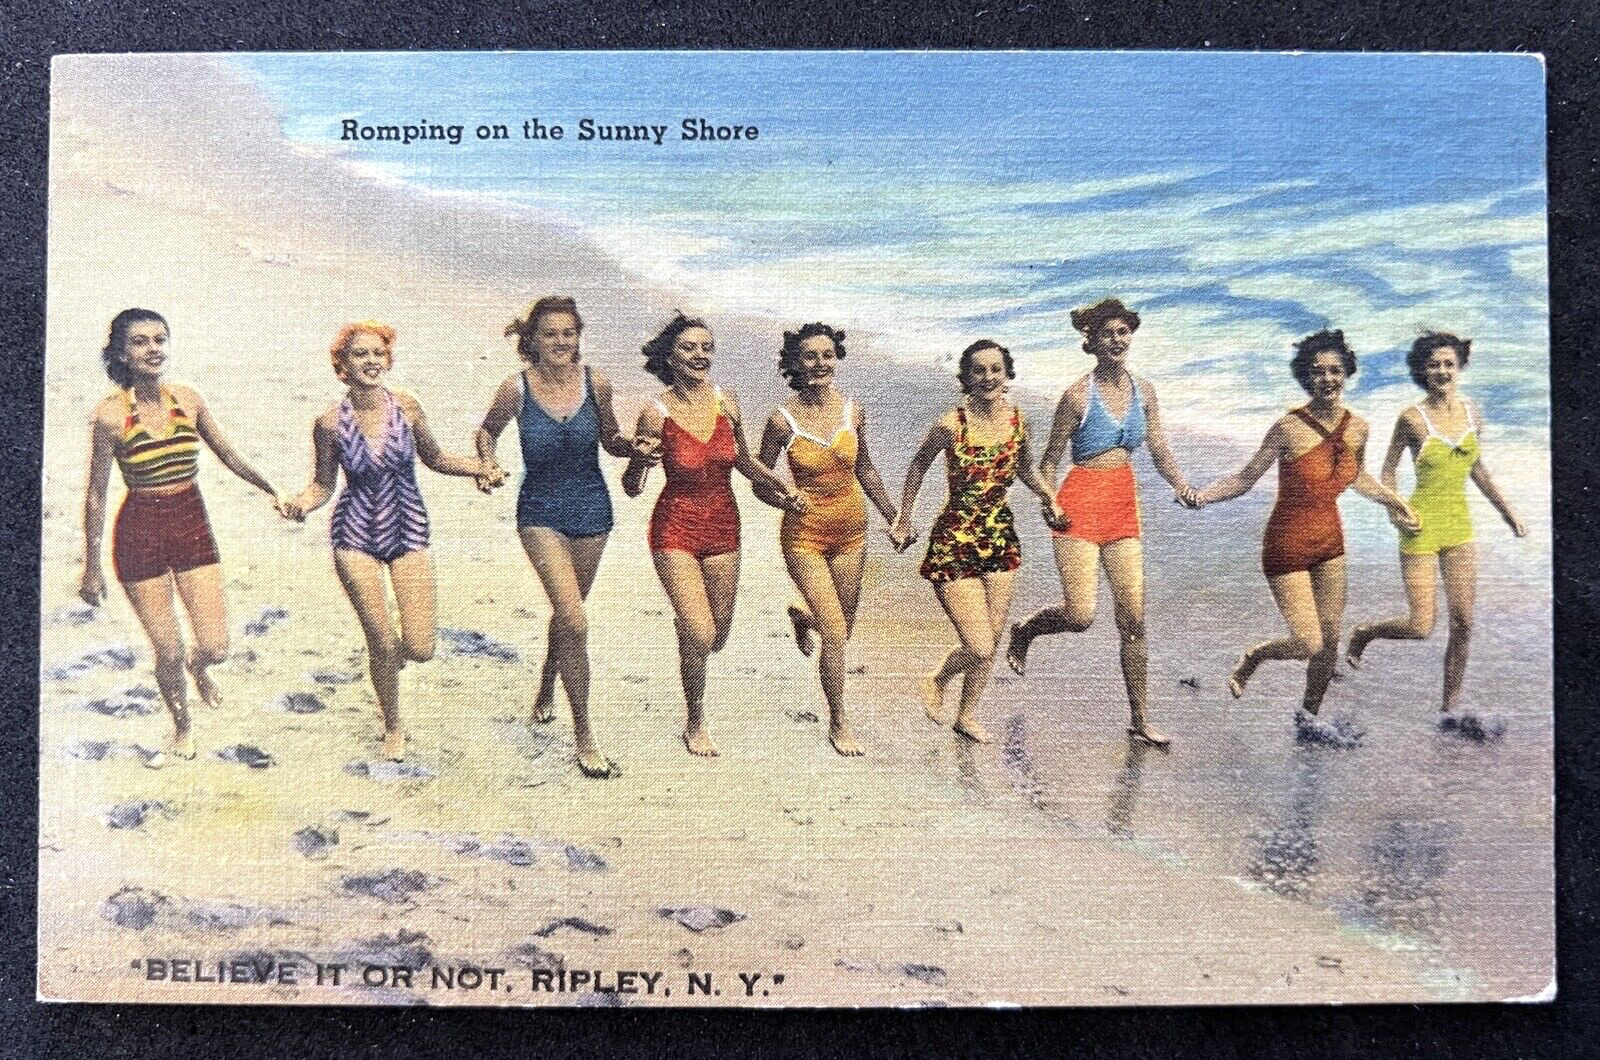 Vintage ROMPING ON THE SUNNY SHORE - BELIEVE IT OR NOT, RIPLEY, NY 1947 Postcard